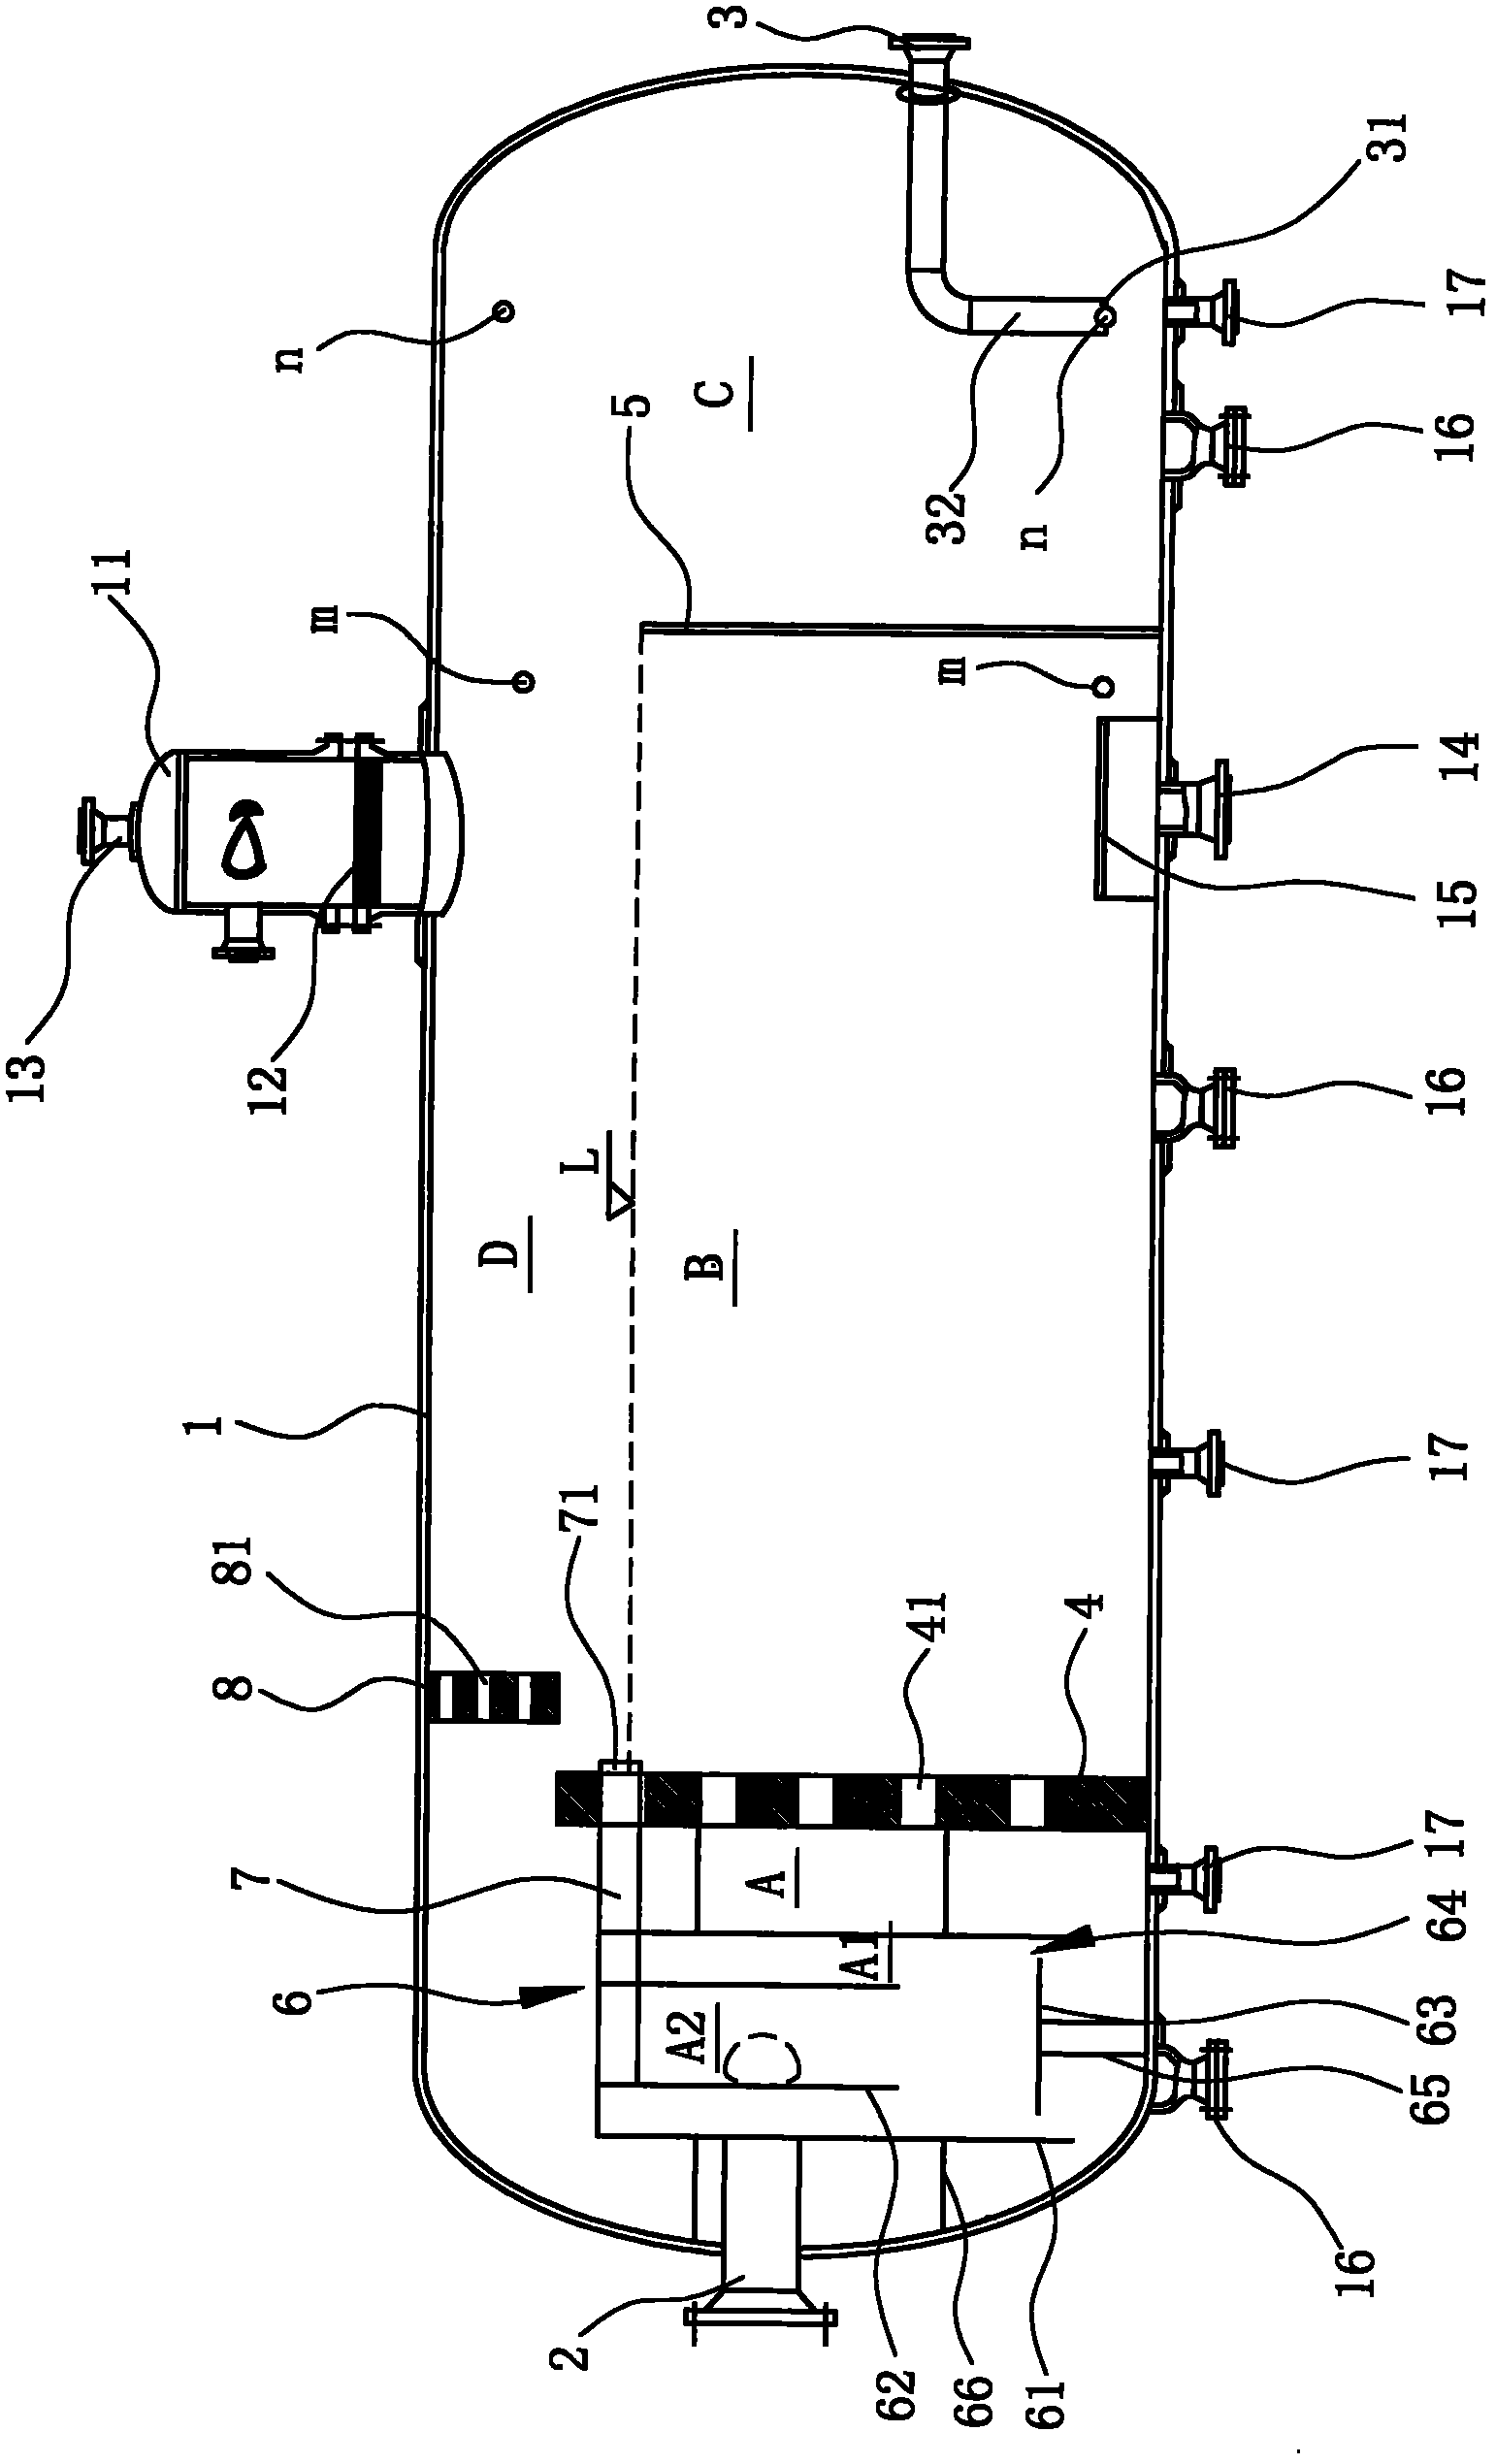 Gas-oil-water three-phase separator